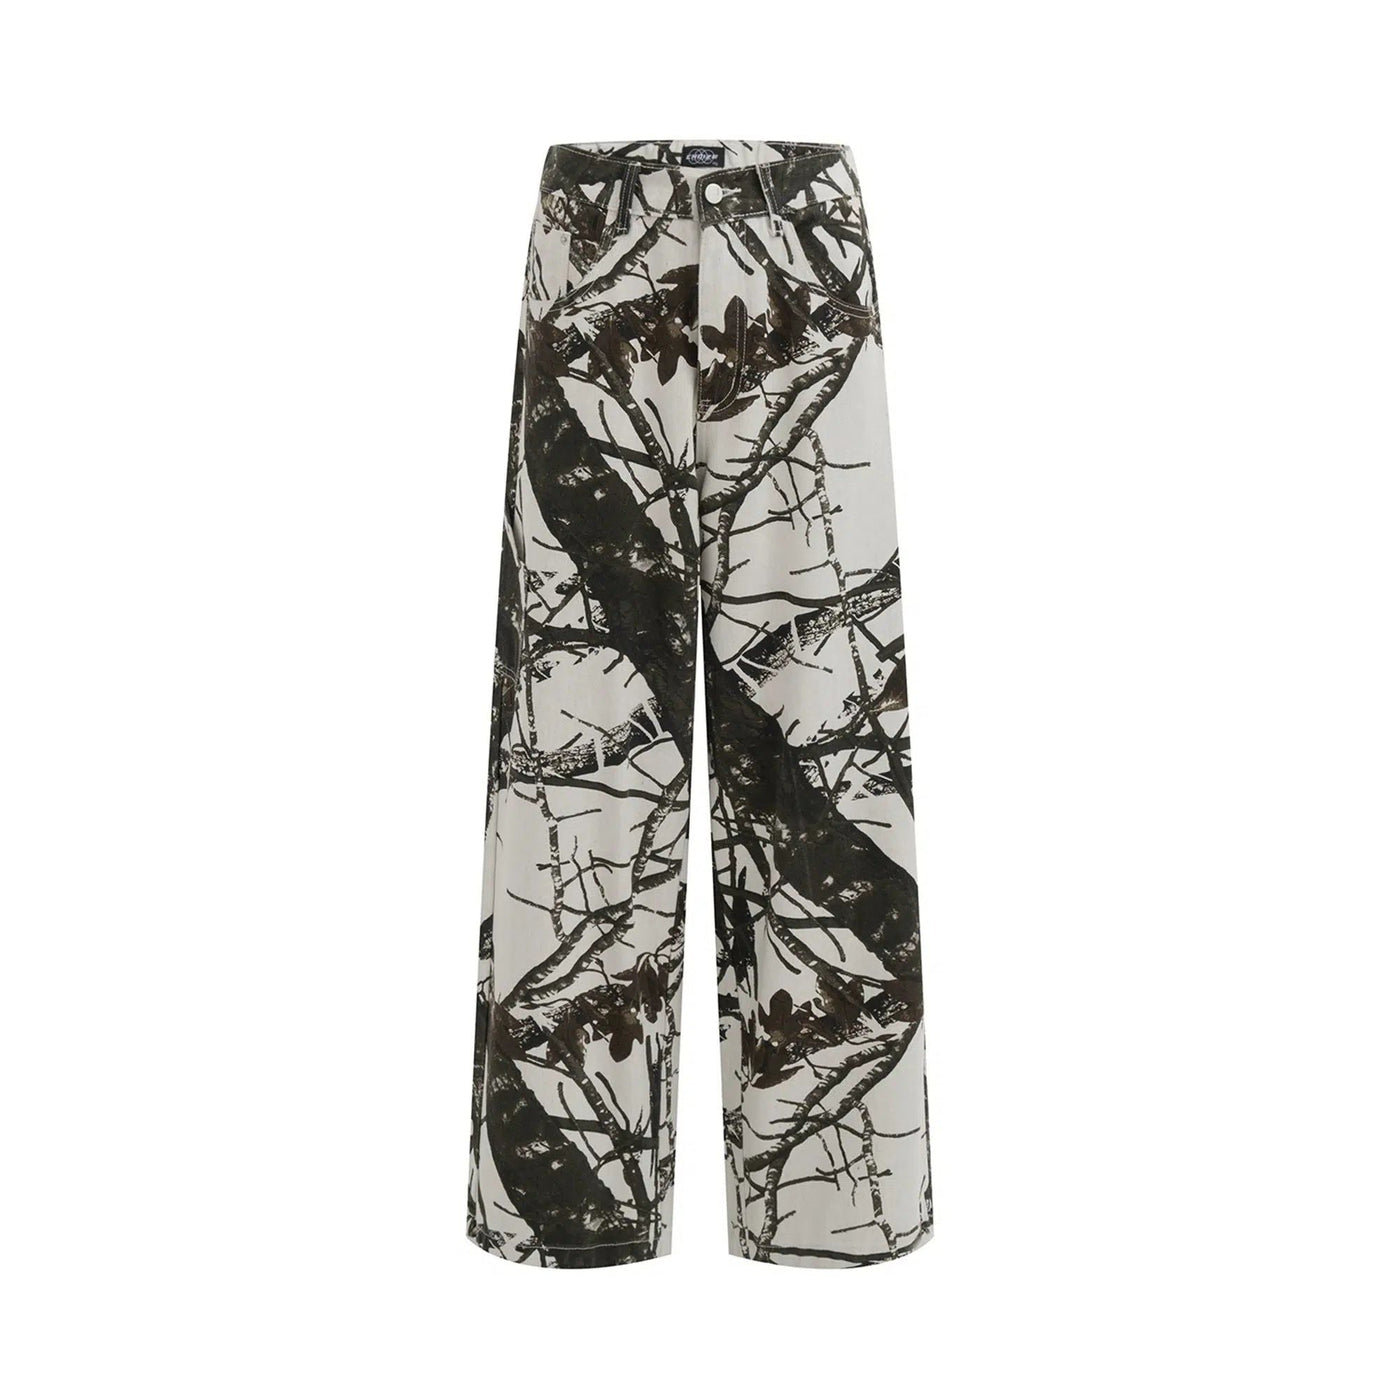 Retro Camouflage Straight Pants Korean Street Fashion Pants By Blacklists Shop Online at OH Vault